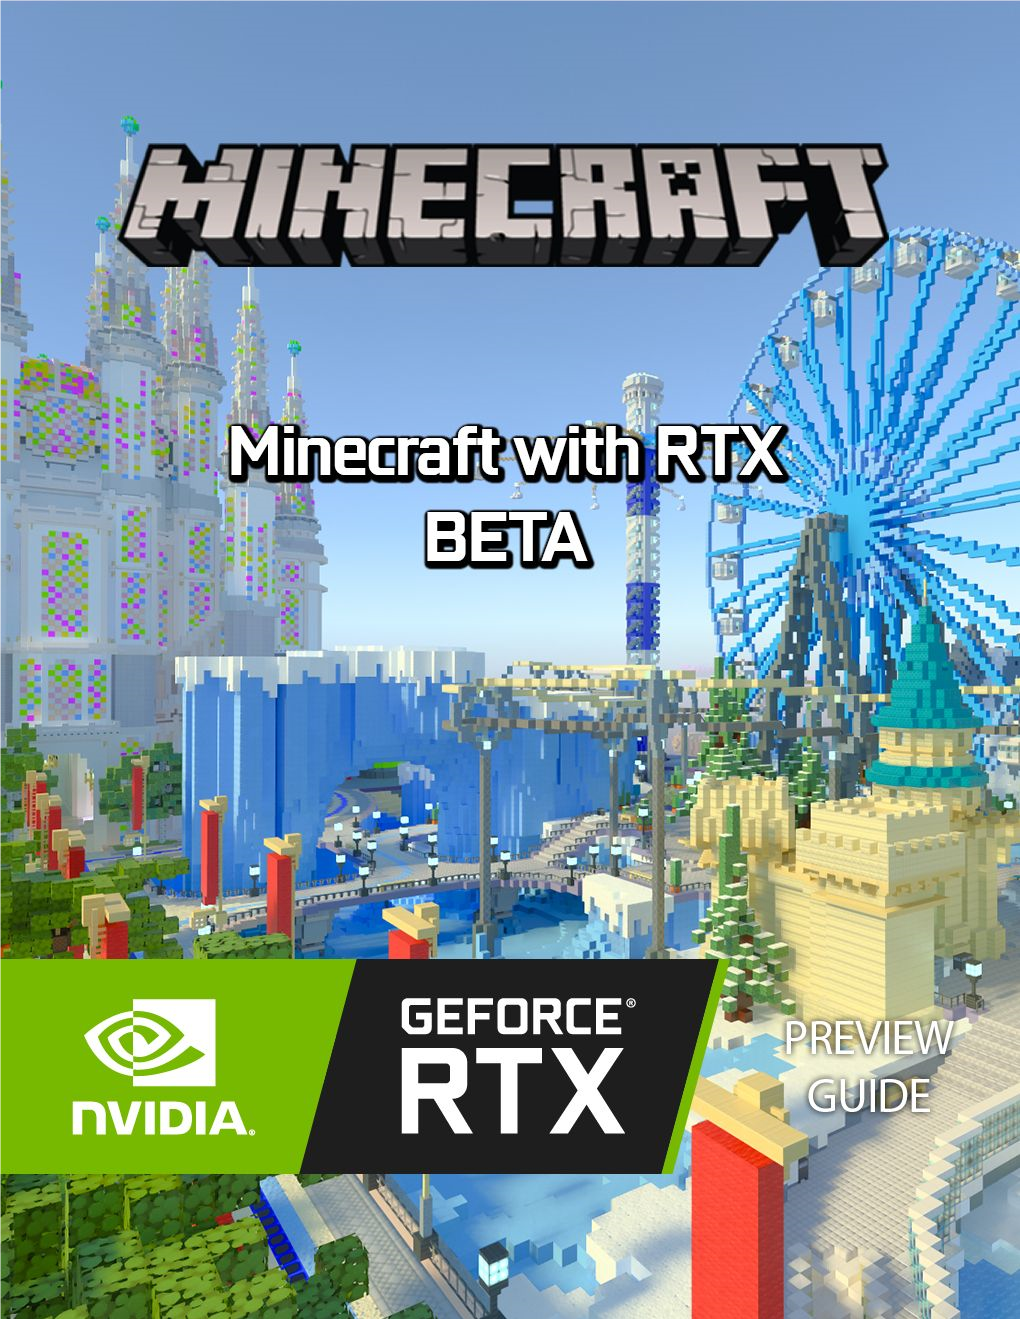 Ray Tracing in Minecraft with RTX Like Q​ Uake II RT​X, M​ Inecraft with RT​X Includes Path Traced Reflections, Lighting, Shadows, Materials, and More